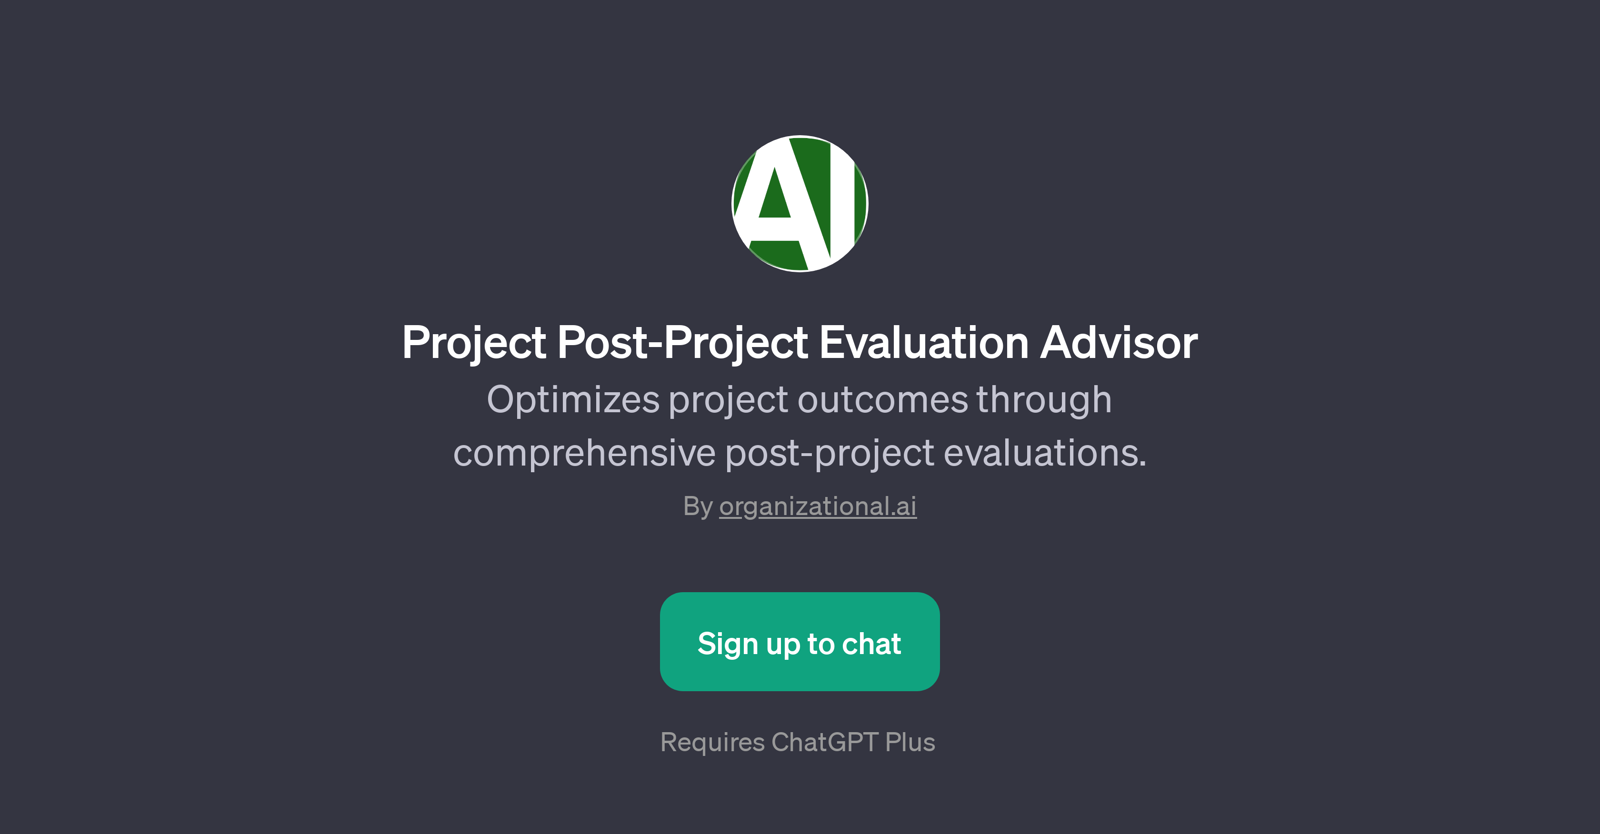 Project Post-Project Evaluation Advisor website